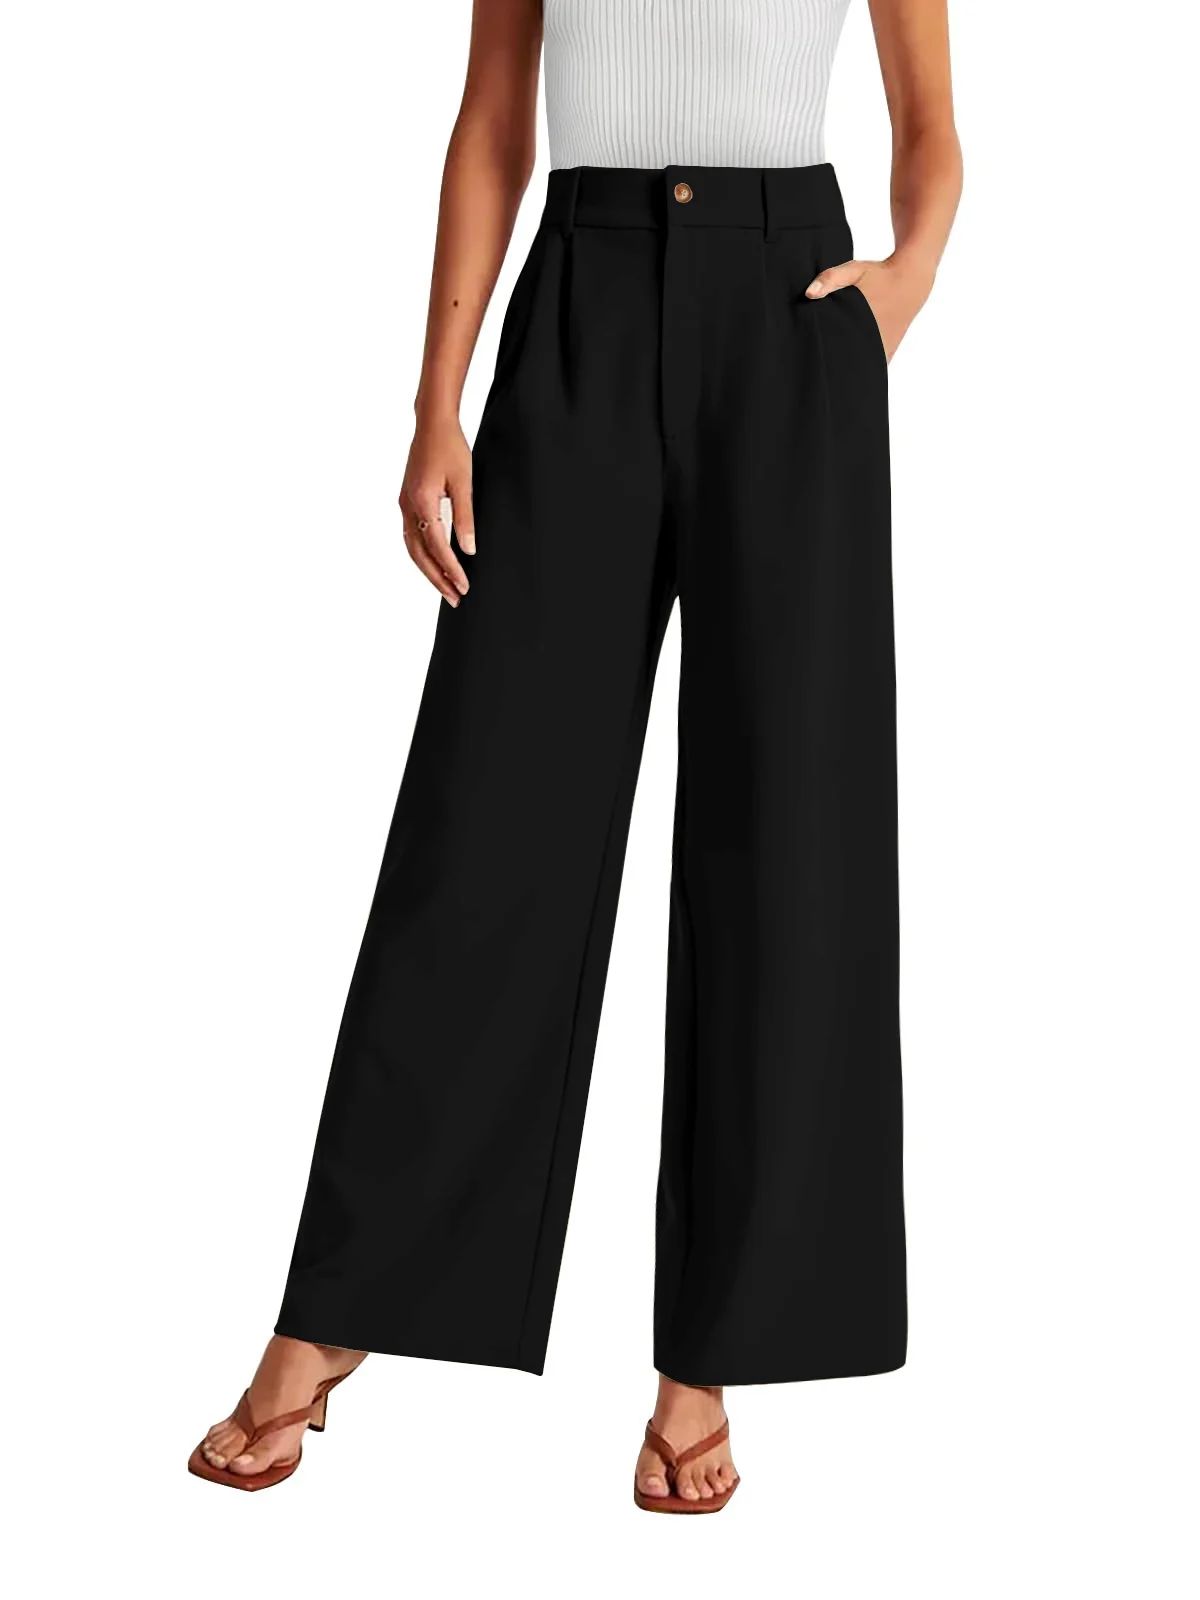 MOSHU High Waisted Work Pants for Women Casual Wide Leg Dress Pants Business Office Trousers with... | Walmart (US)